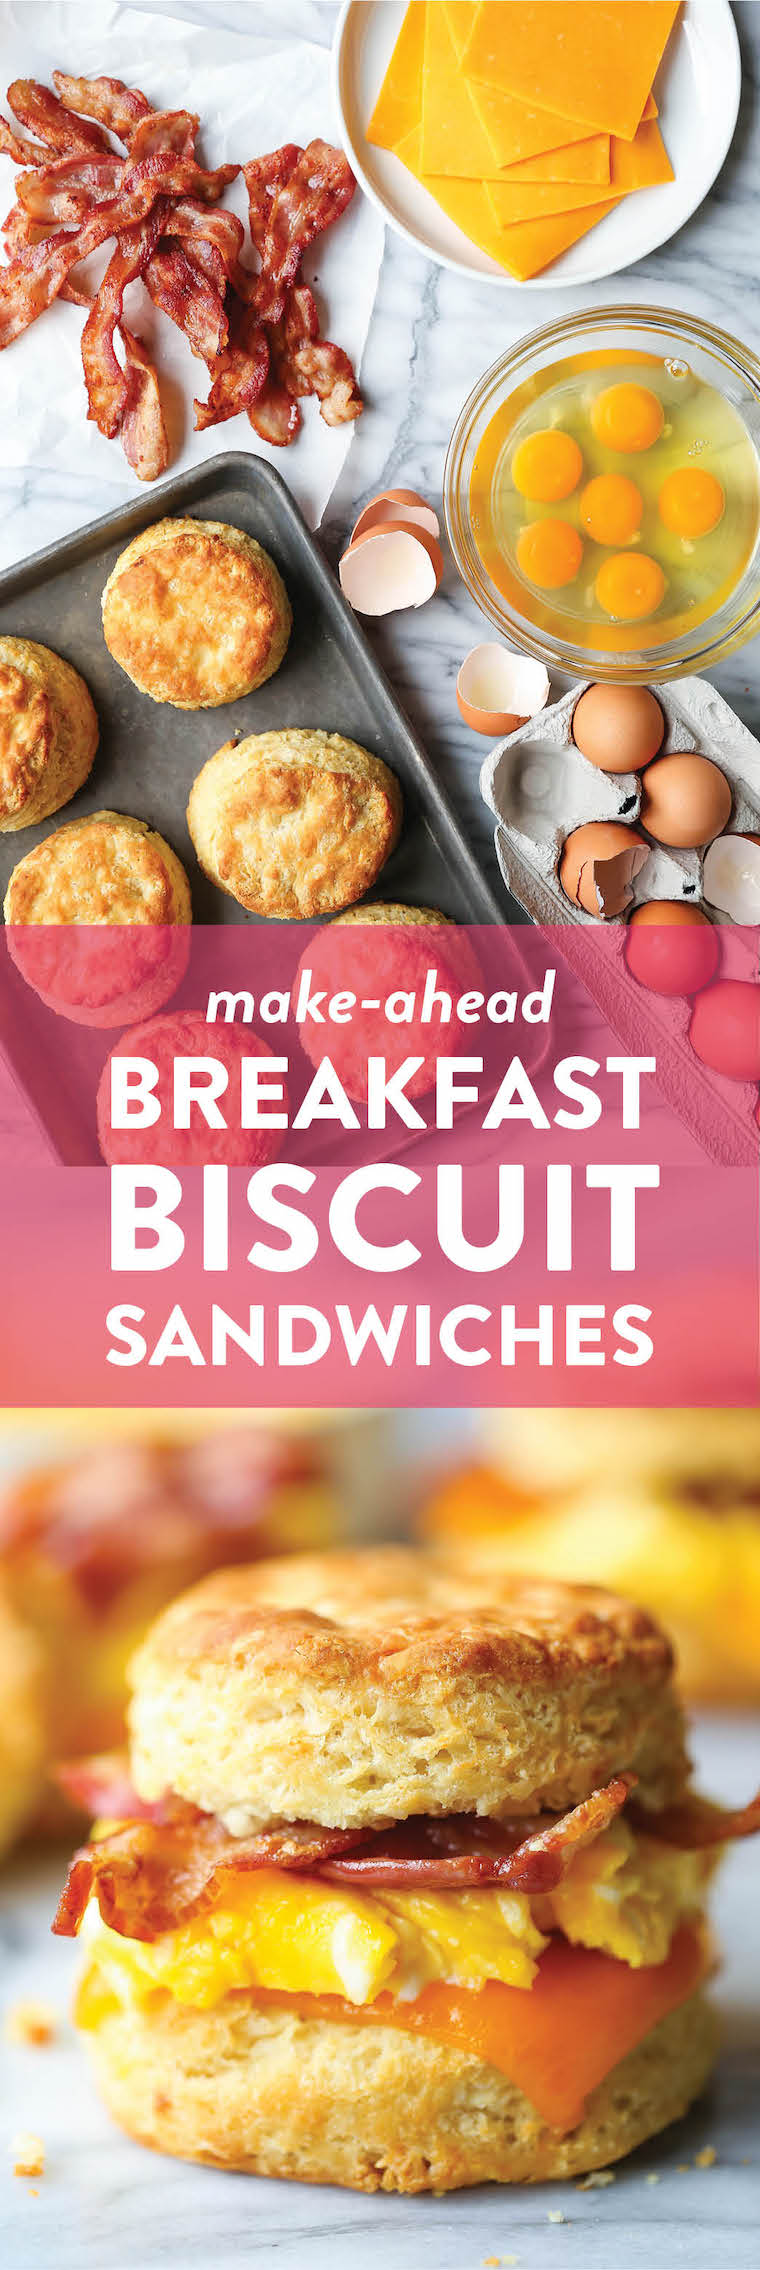 Make Ahead Breakfast Biscuit Sandwiches - Oh-so-warm, flaky buttermilk biscuits with eggs, bacon and cheese. Store in the fridge and reheat in the morning!